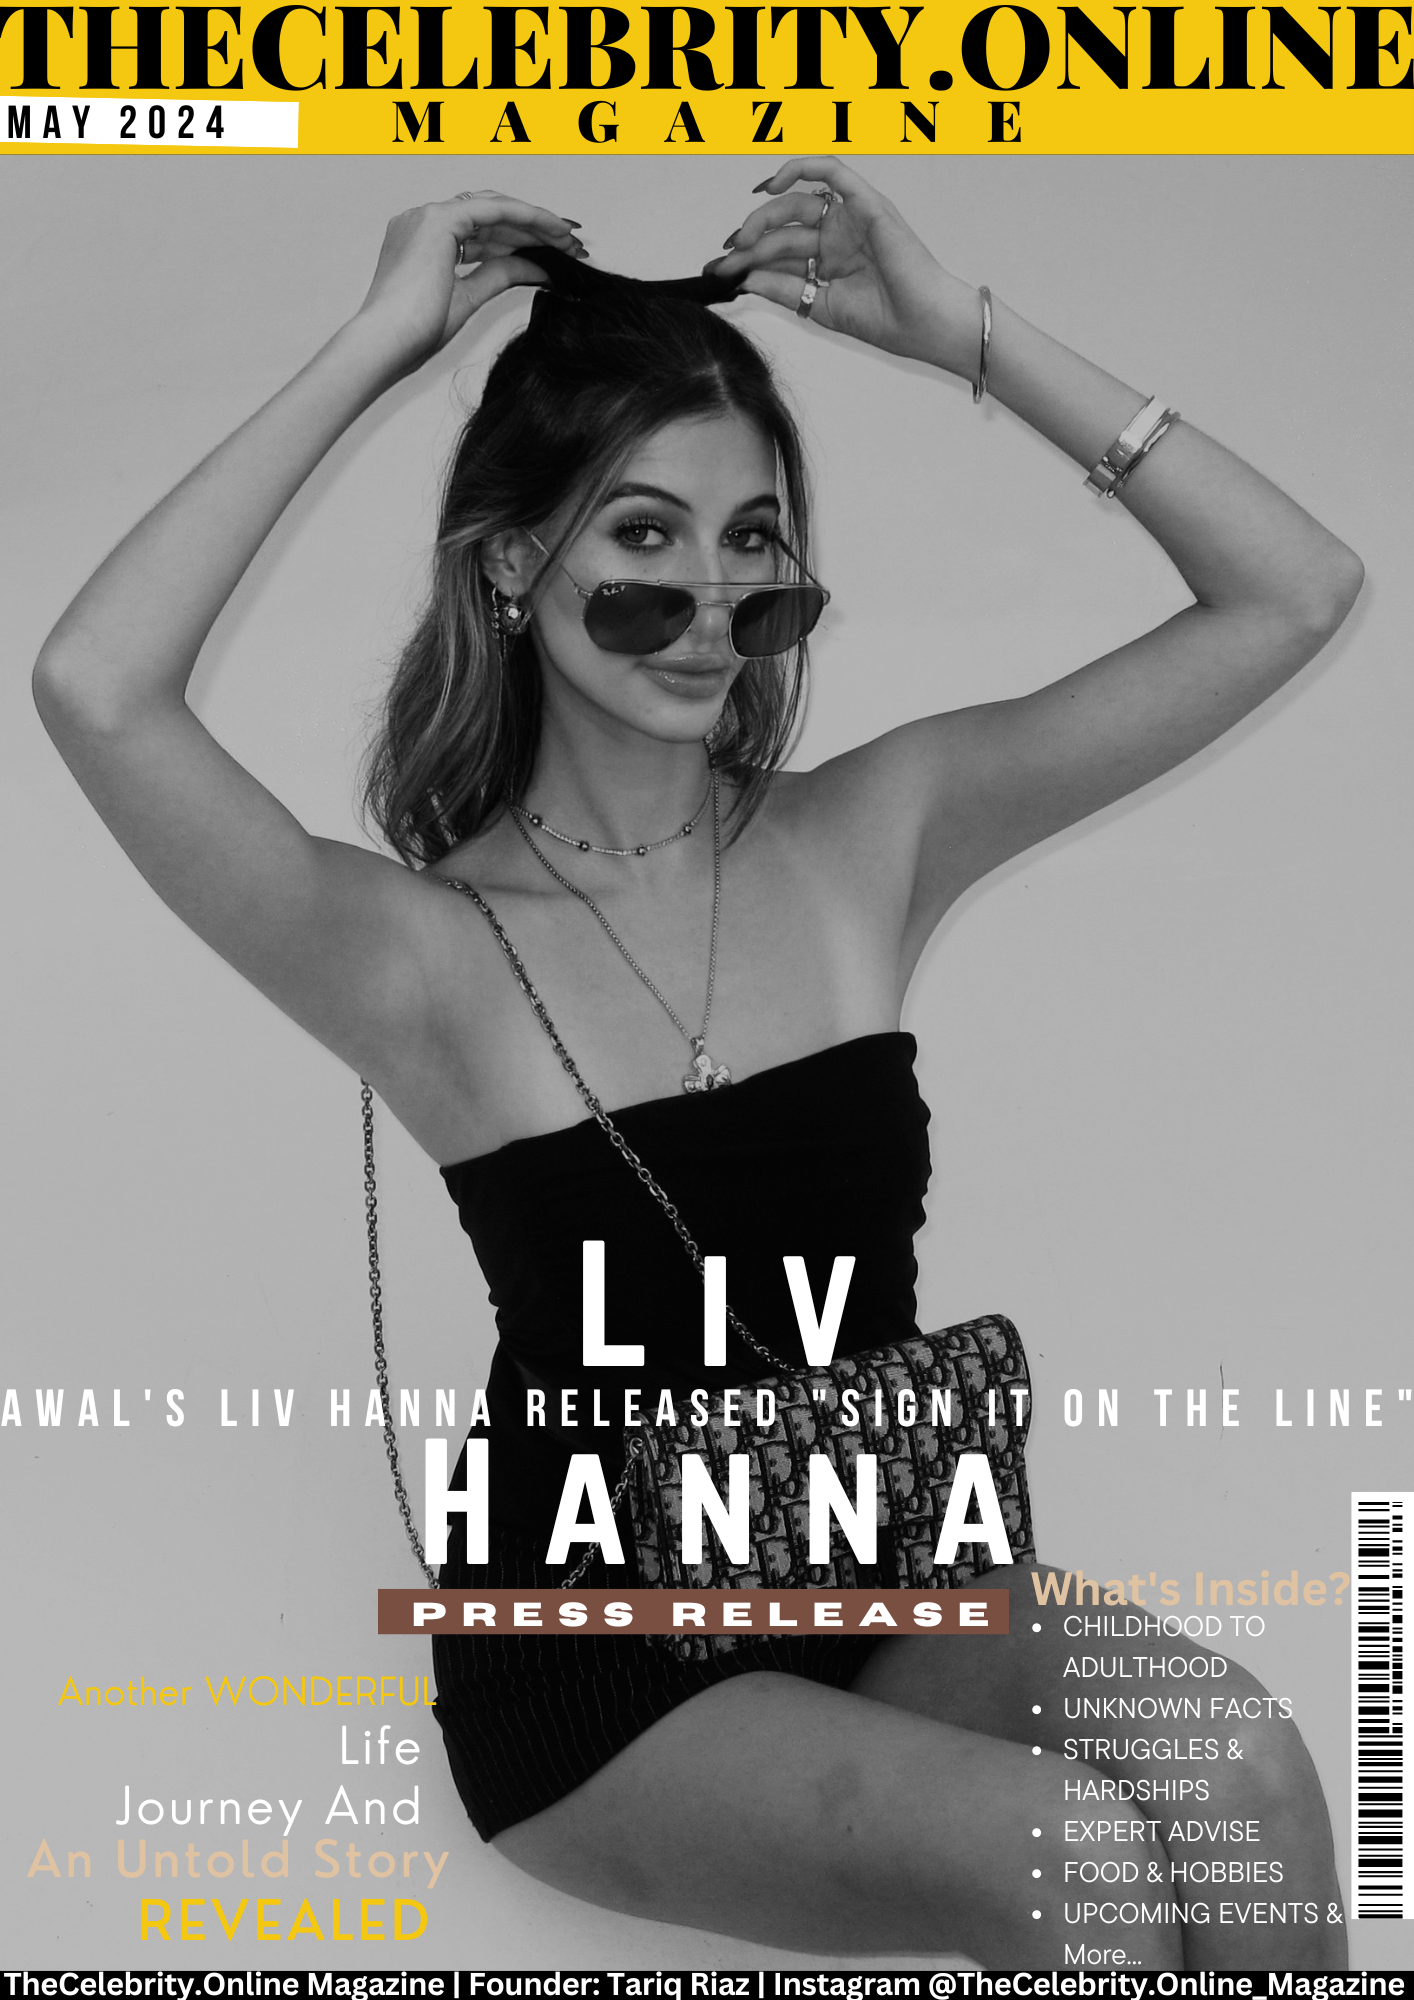 AWAL’s Liv Hanna released a new single, “Sign It on the Line”